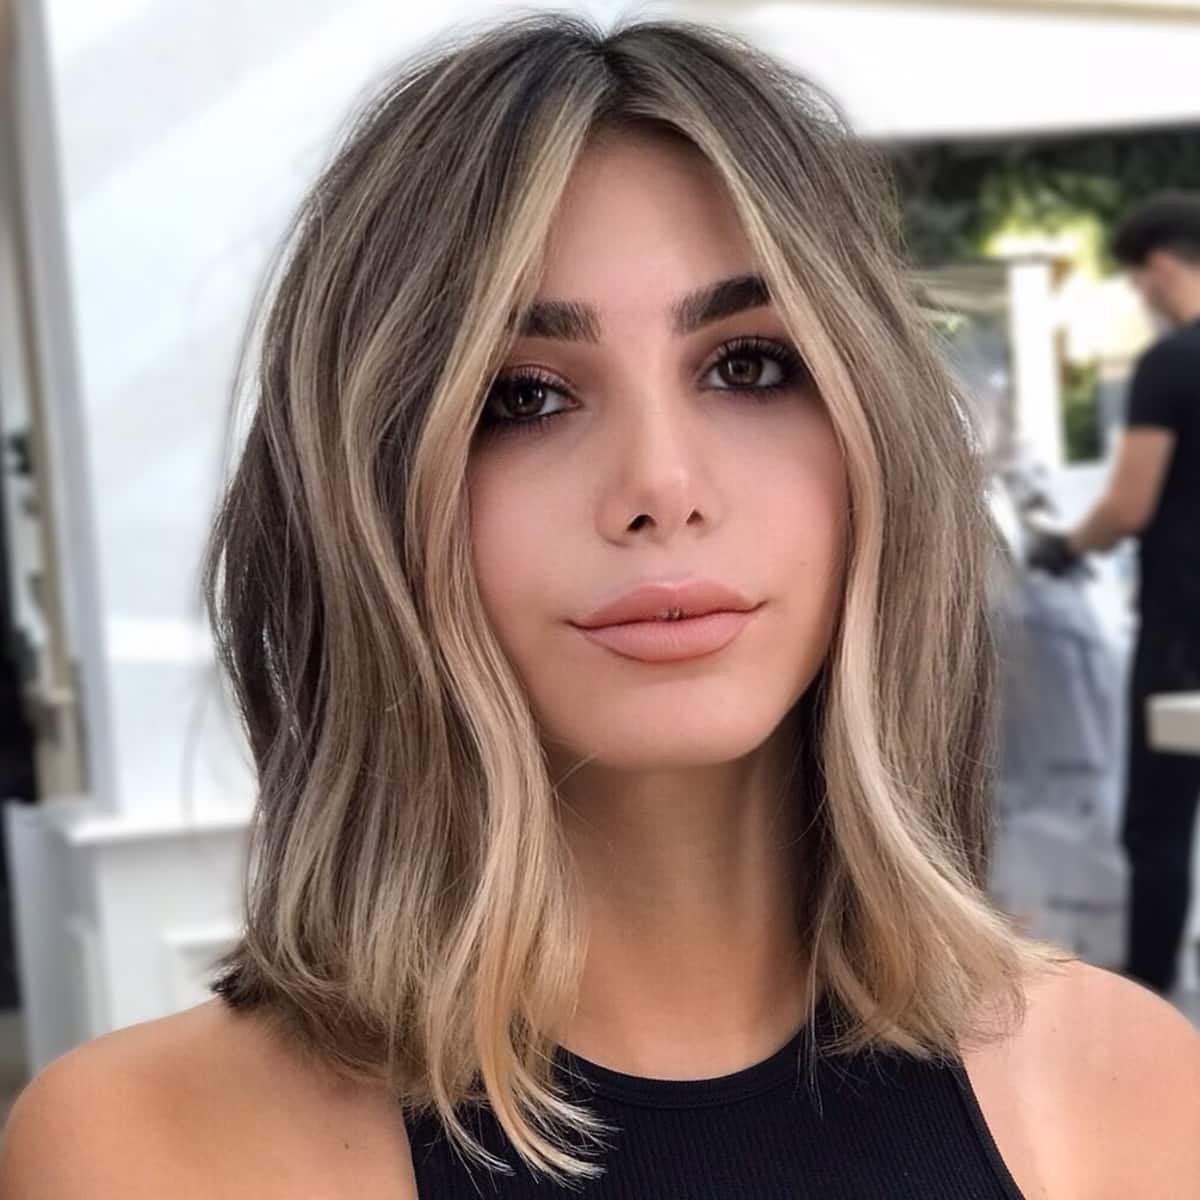 60 Super Chic Hairstyles for Long Faces to Break Up the Length